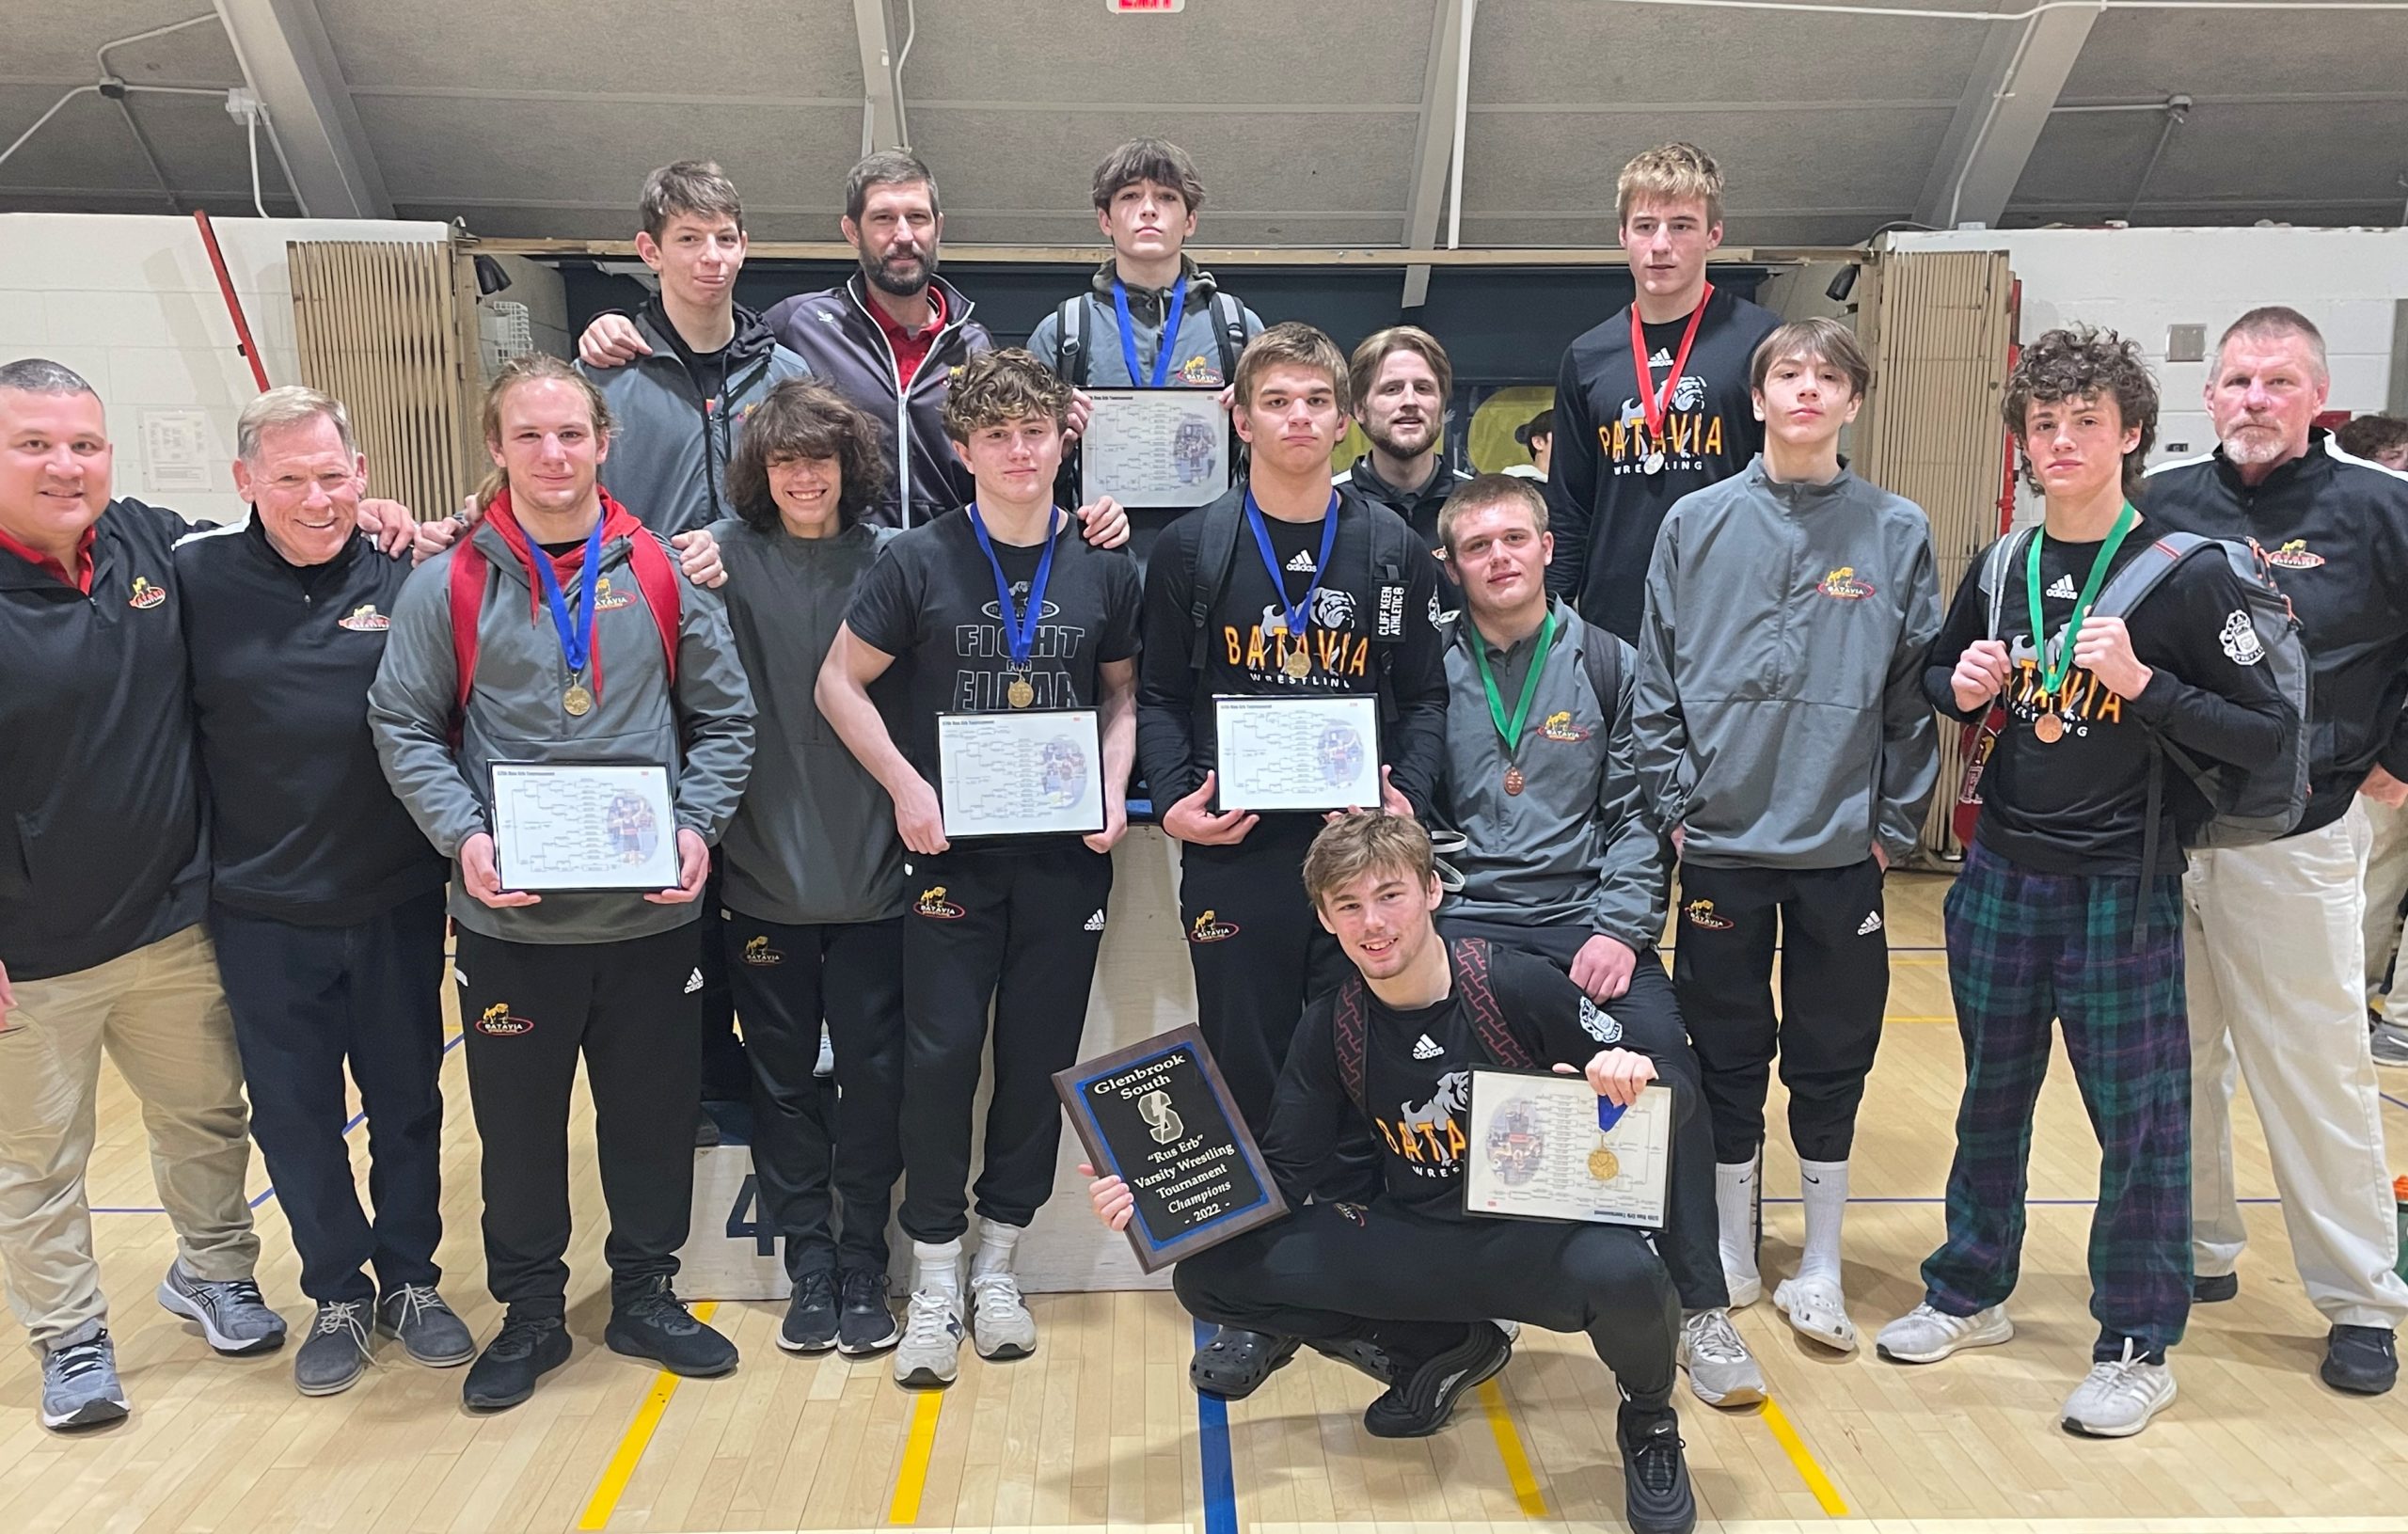 Officials Coaches Glenbrook Batavia roll and South winning Illinois Association after title Invite Erb ready Wrestling to -